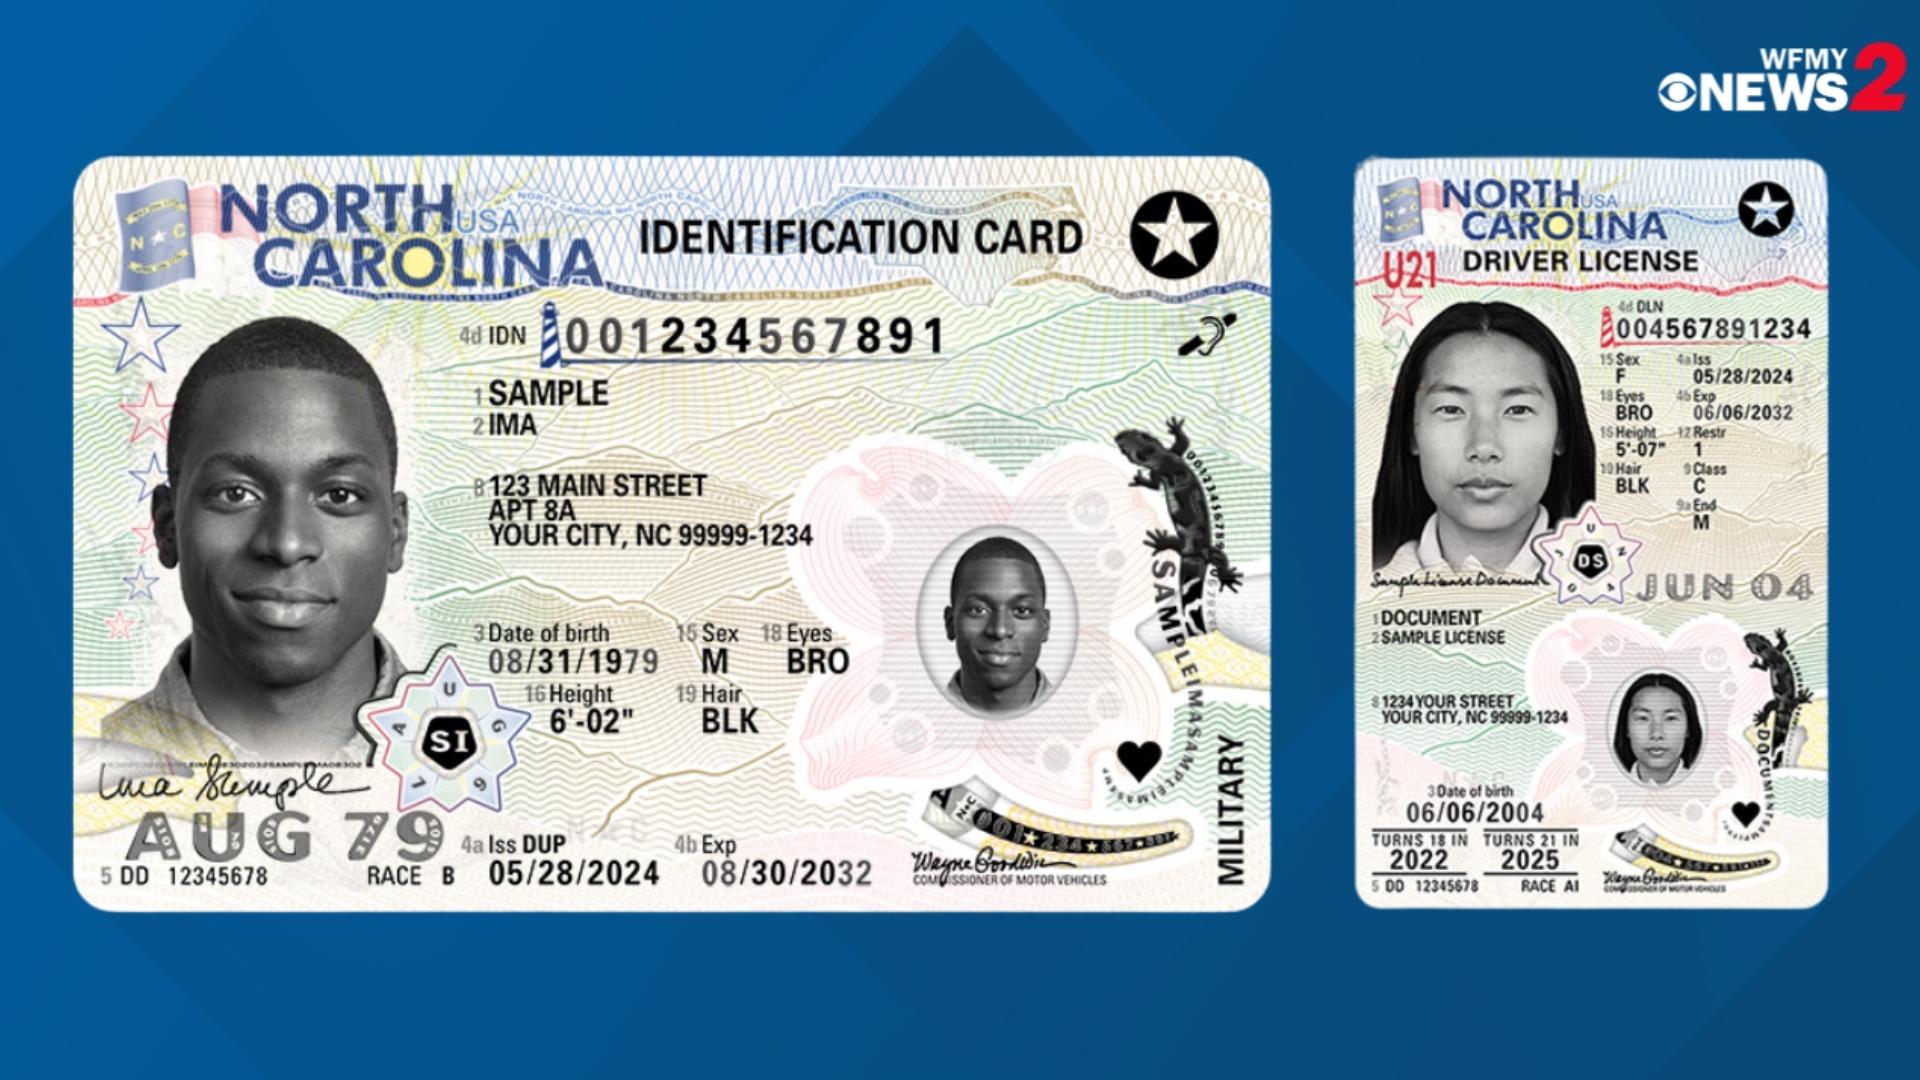 Digital driver's licenses will soon be an option for North Carolinians.